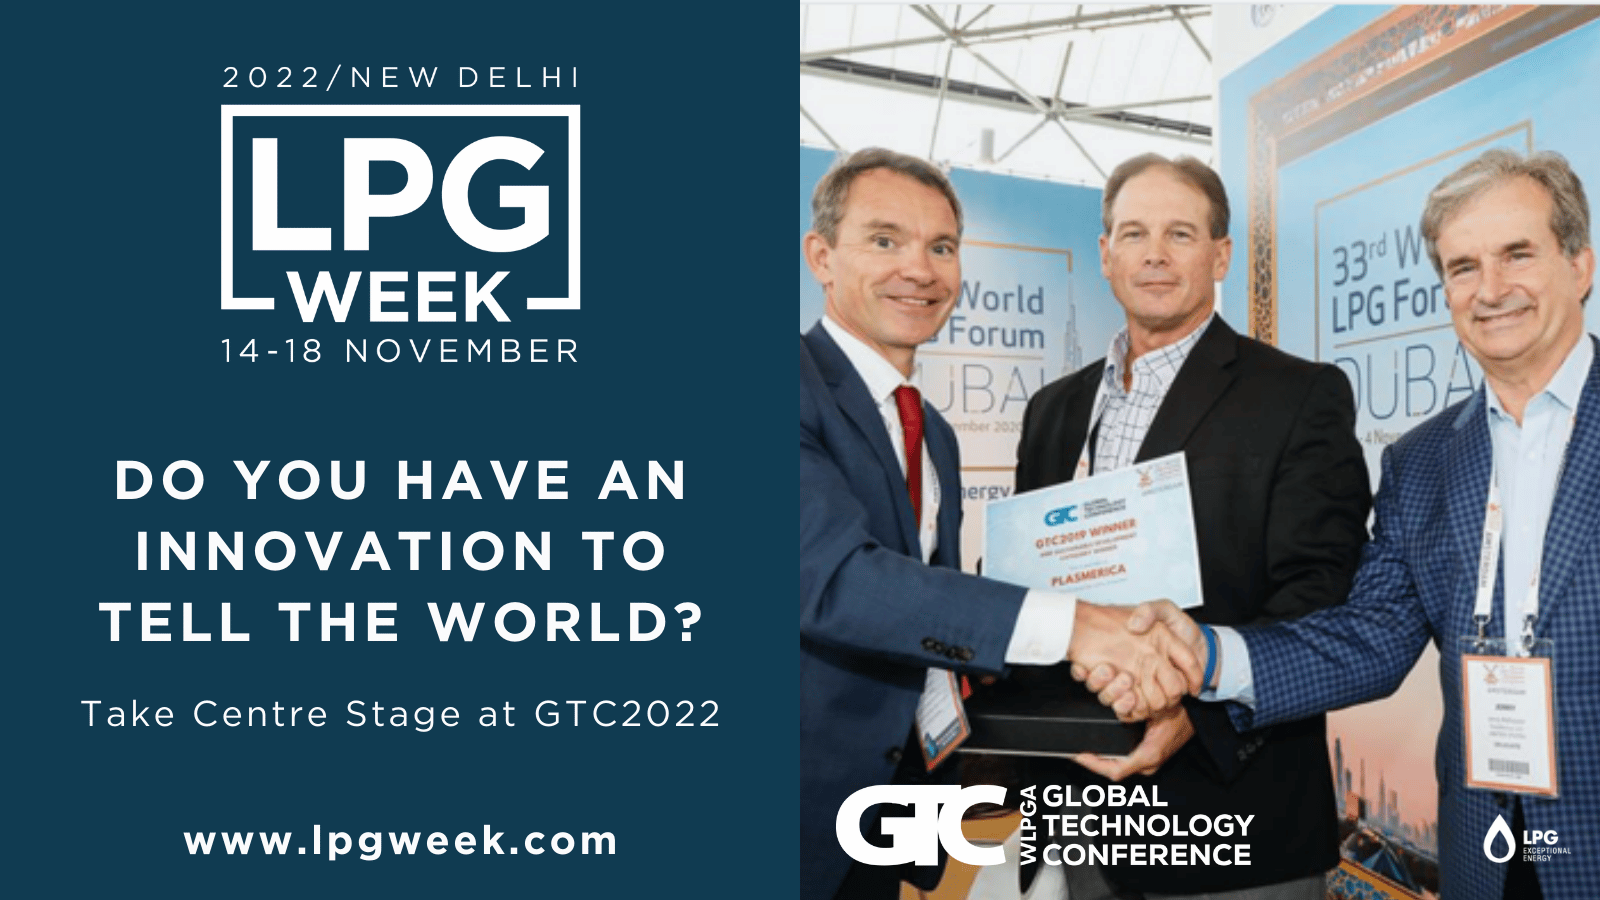 2 weeks left to submit your paper for the Global Technology Conference